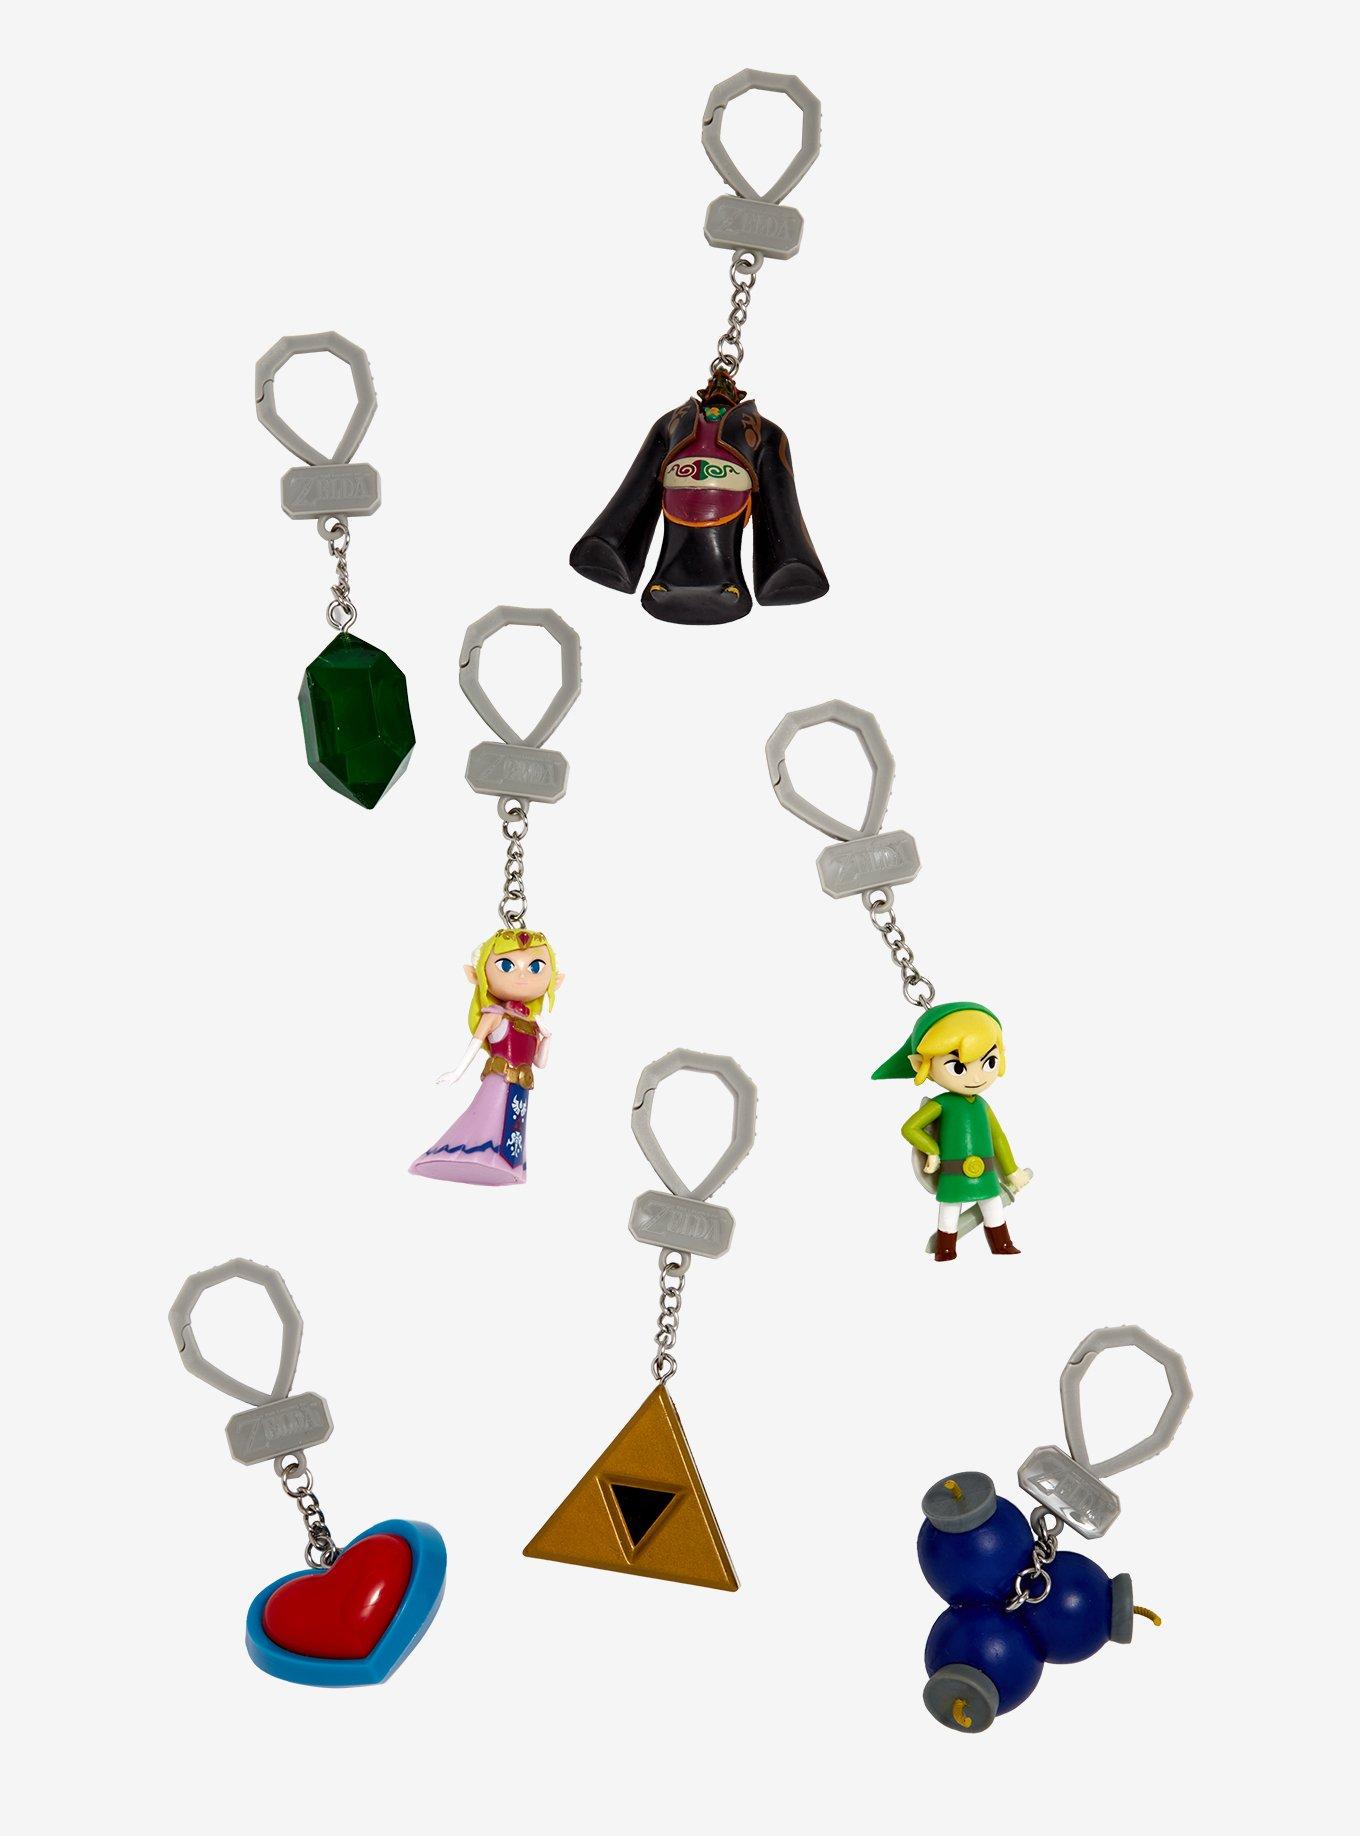 Little Buddy Toy, The Legend of Zelda The Wind Waker, Link, Small